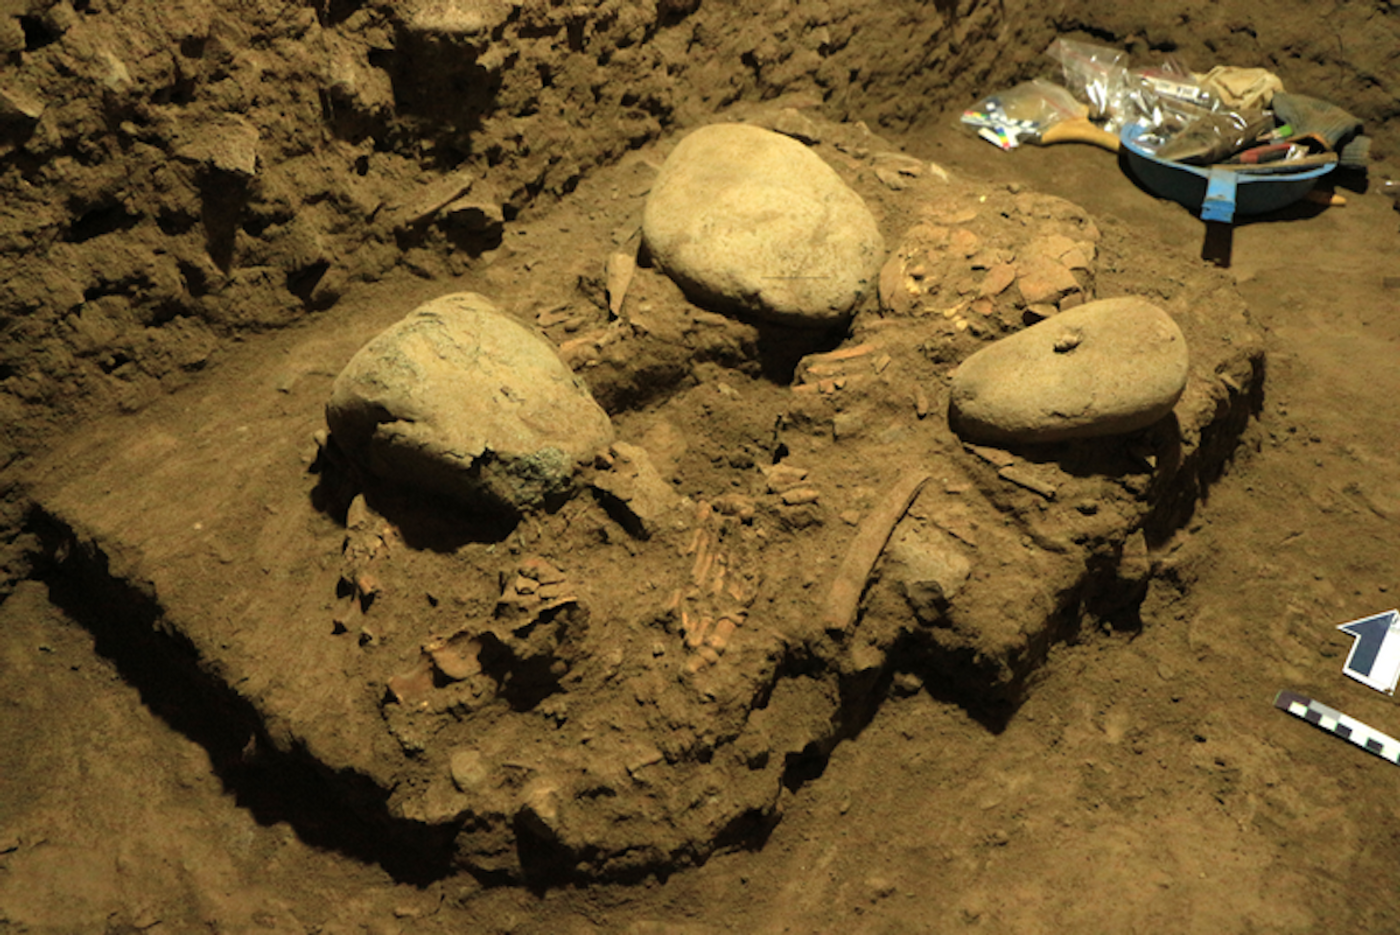 Excavations at the Leang Panninge site, and the skeleton as found. / Credit: Hasanuddin University, Indonesia